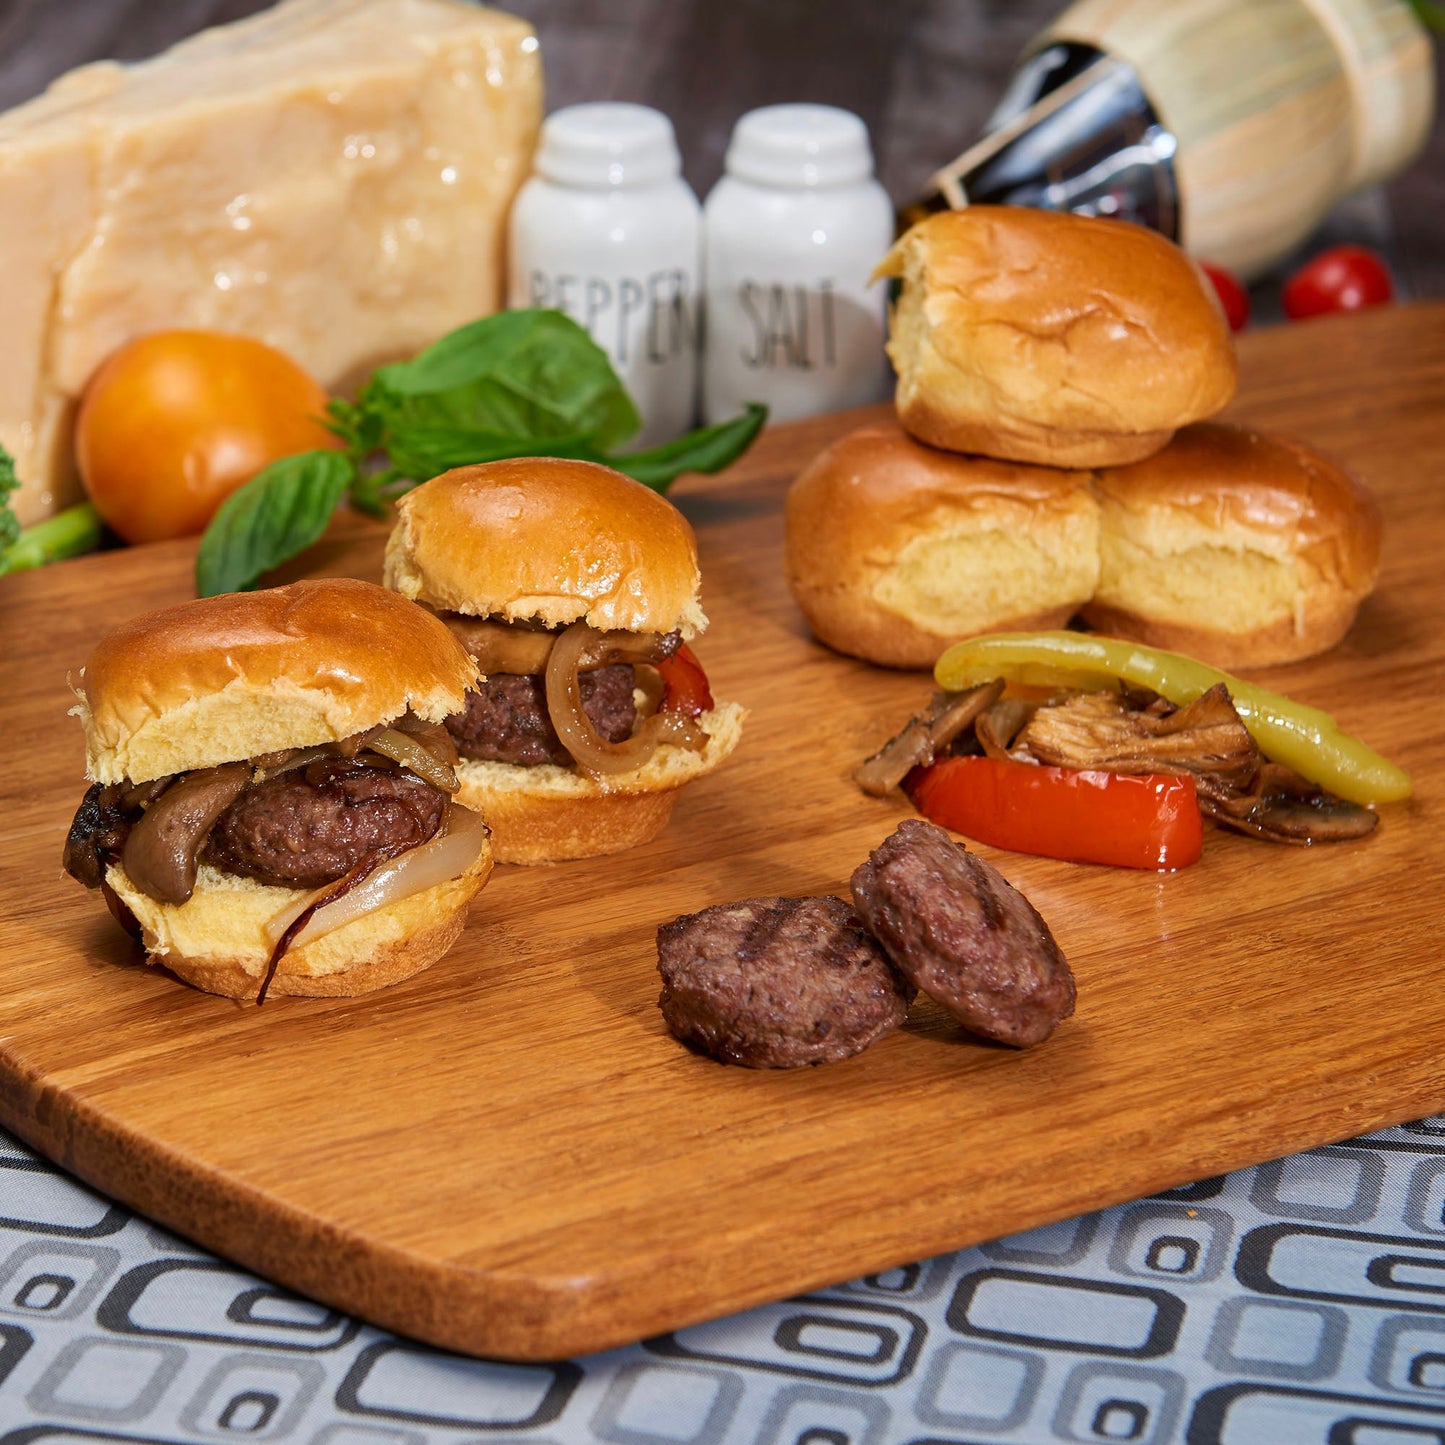 Grilled Slider Burgers with Fontina, Mushrooms, and Caramelized Onions (Buns served on the side)